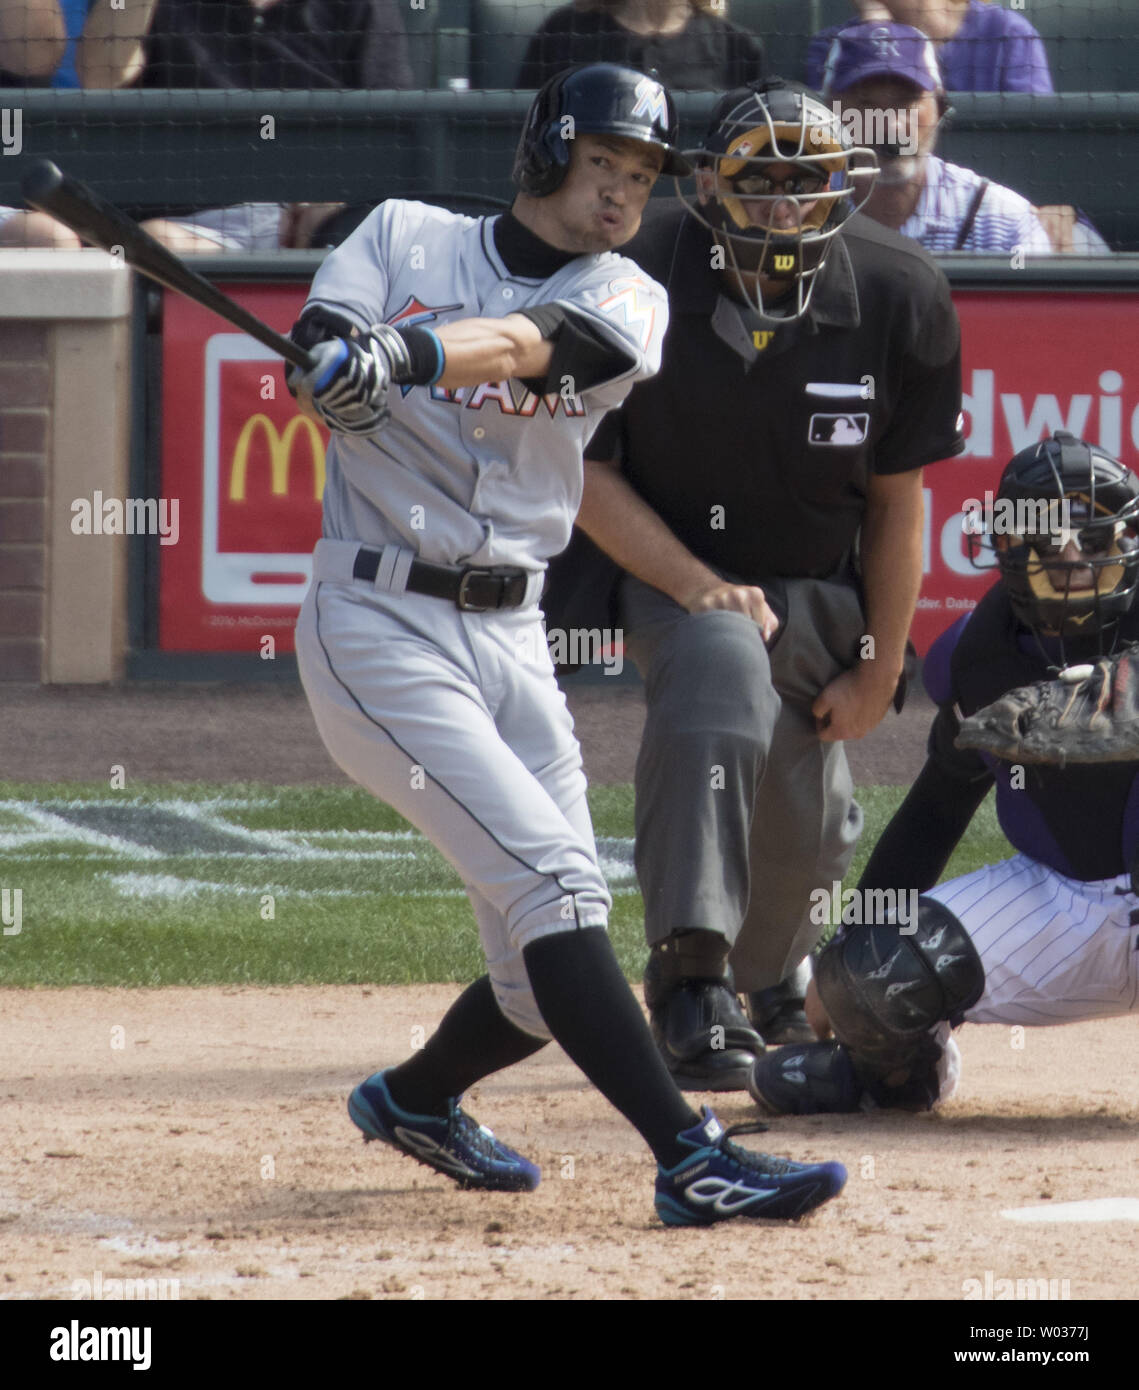 Miami Marlins outfielder Ichiro Suzuki hits a triple in the seventh inning to notch his 3,000 career hit at Coors Field in Denver on August 7, 2016. Ichiro becomes the 30th player in Major League history to record 3,000 hits. Photo by Gary C. Caskey/UPI Stock Photo